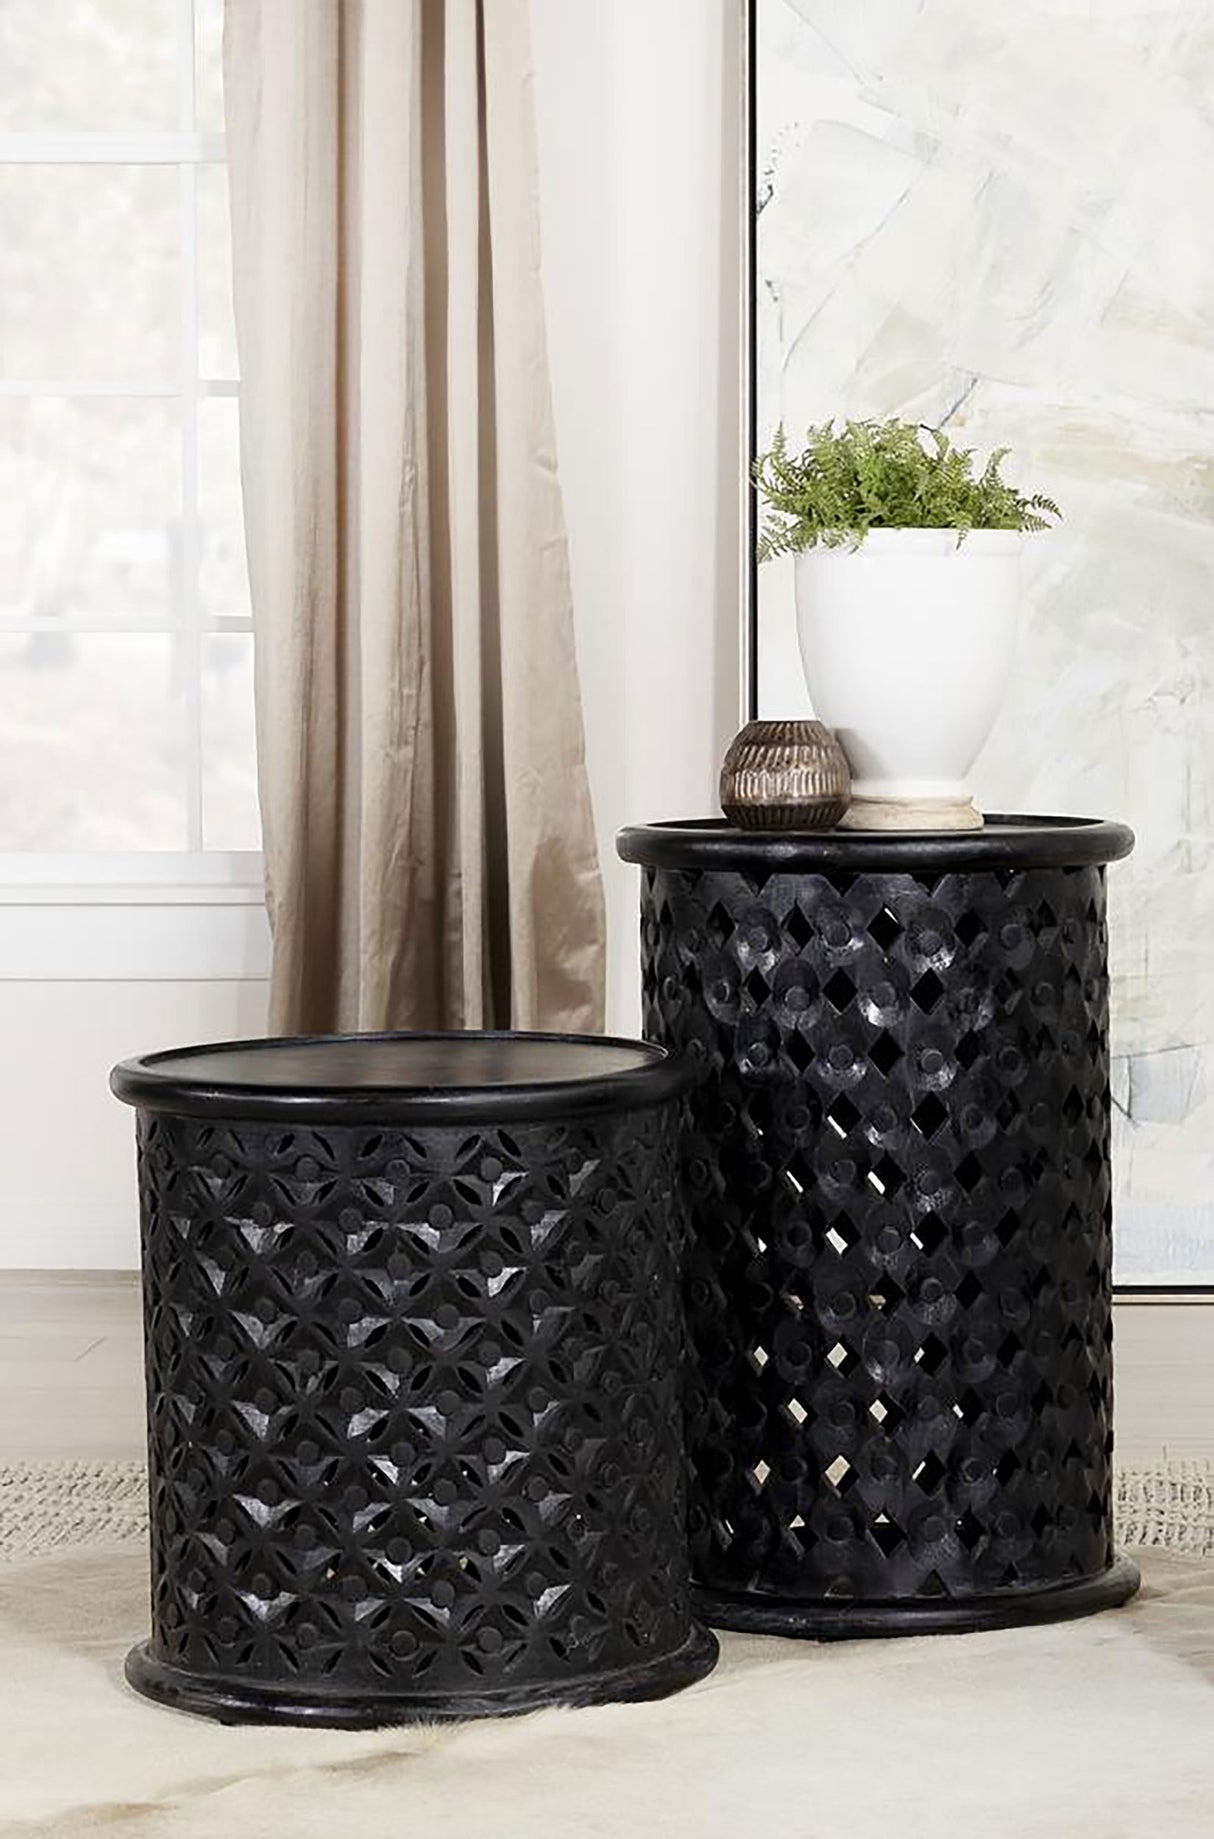 Side Table - Krish 18-inch Round Accent Table Black Stain